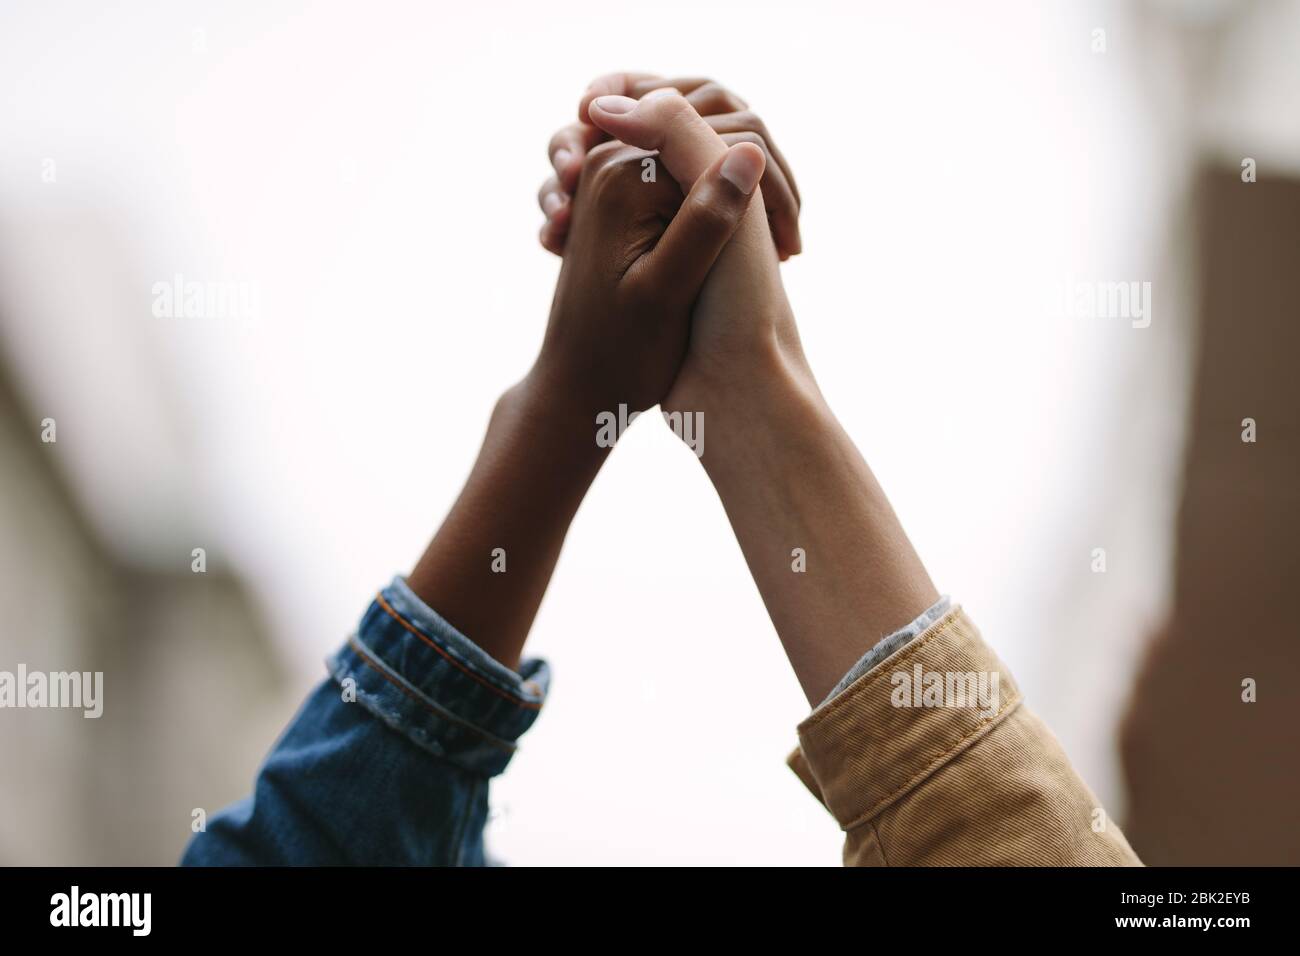 Symbol of unity. Two women activists holding hands. Demonstrators protesting together holding hands. Stock Photo